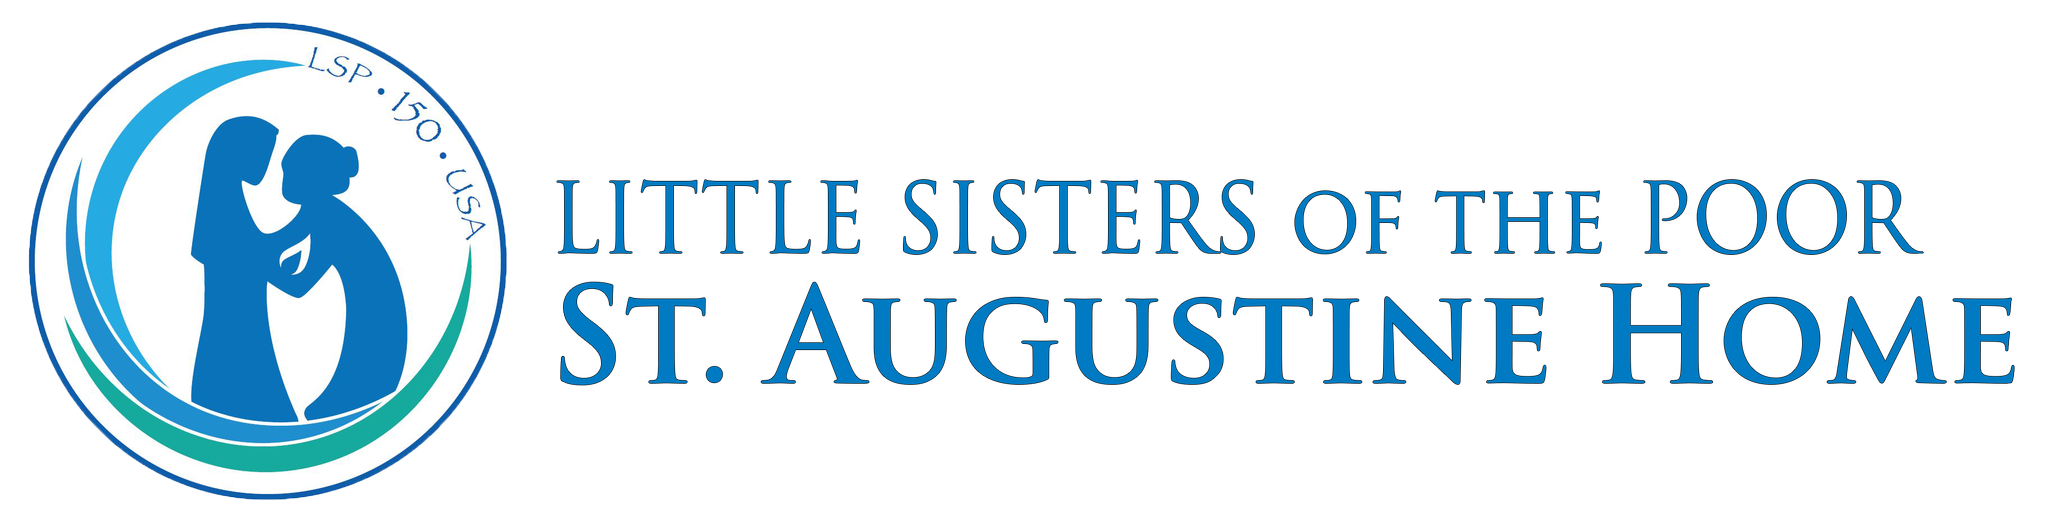 Little Sisters of the Poor Indianapolis